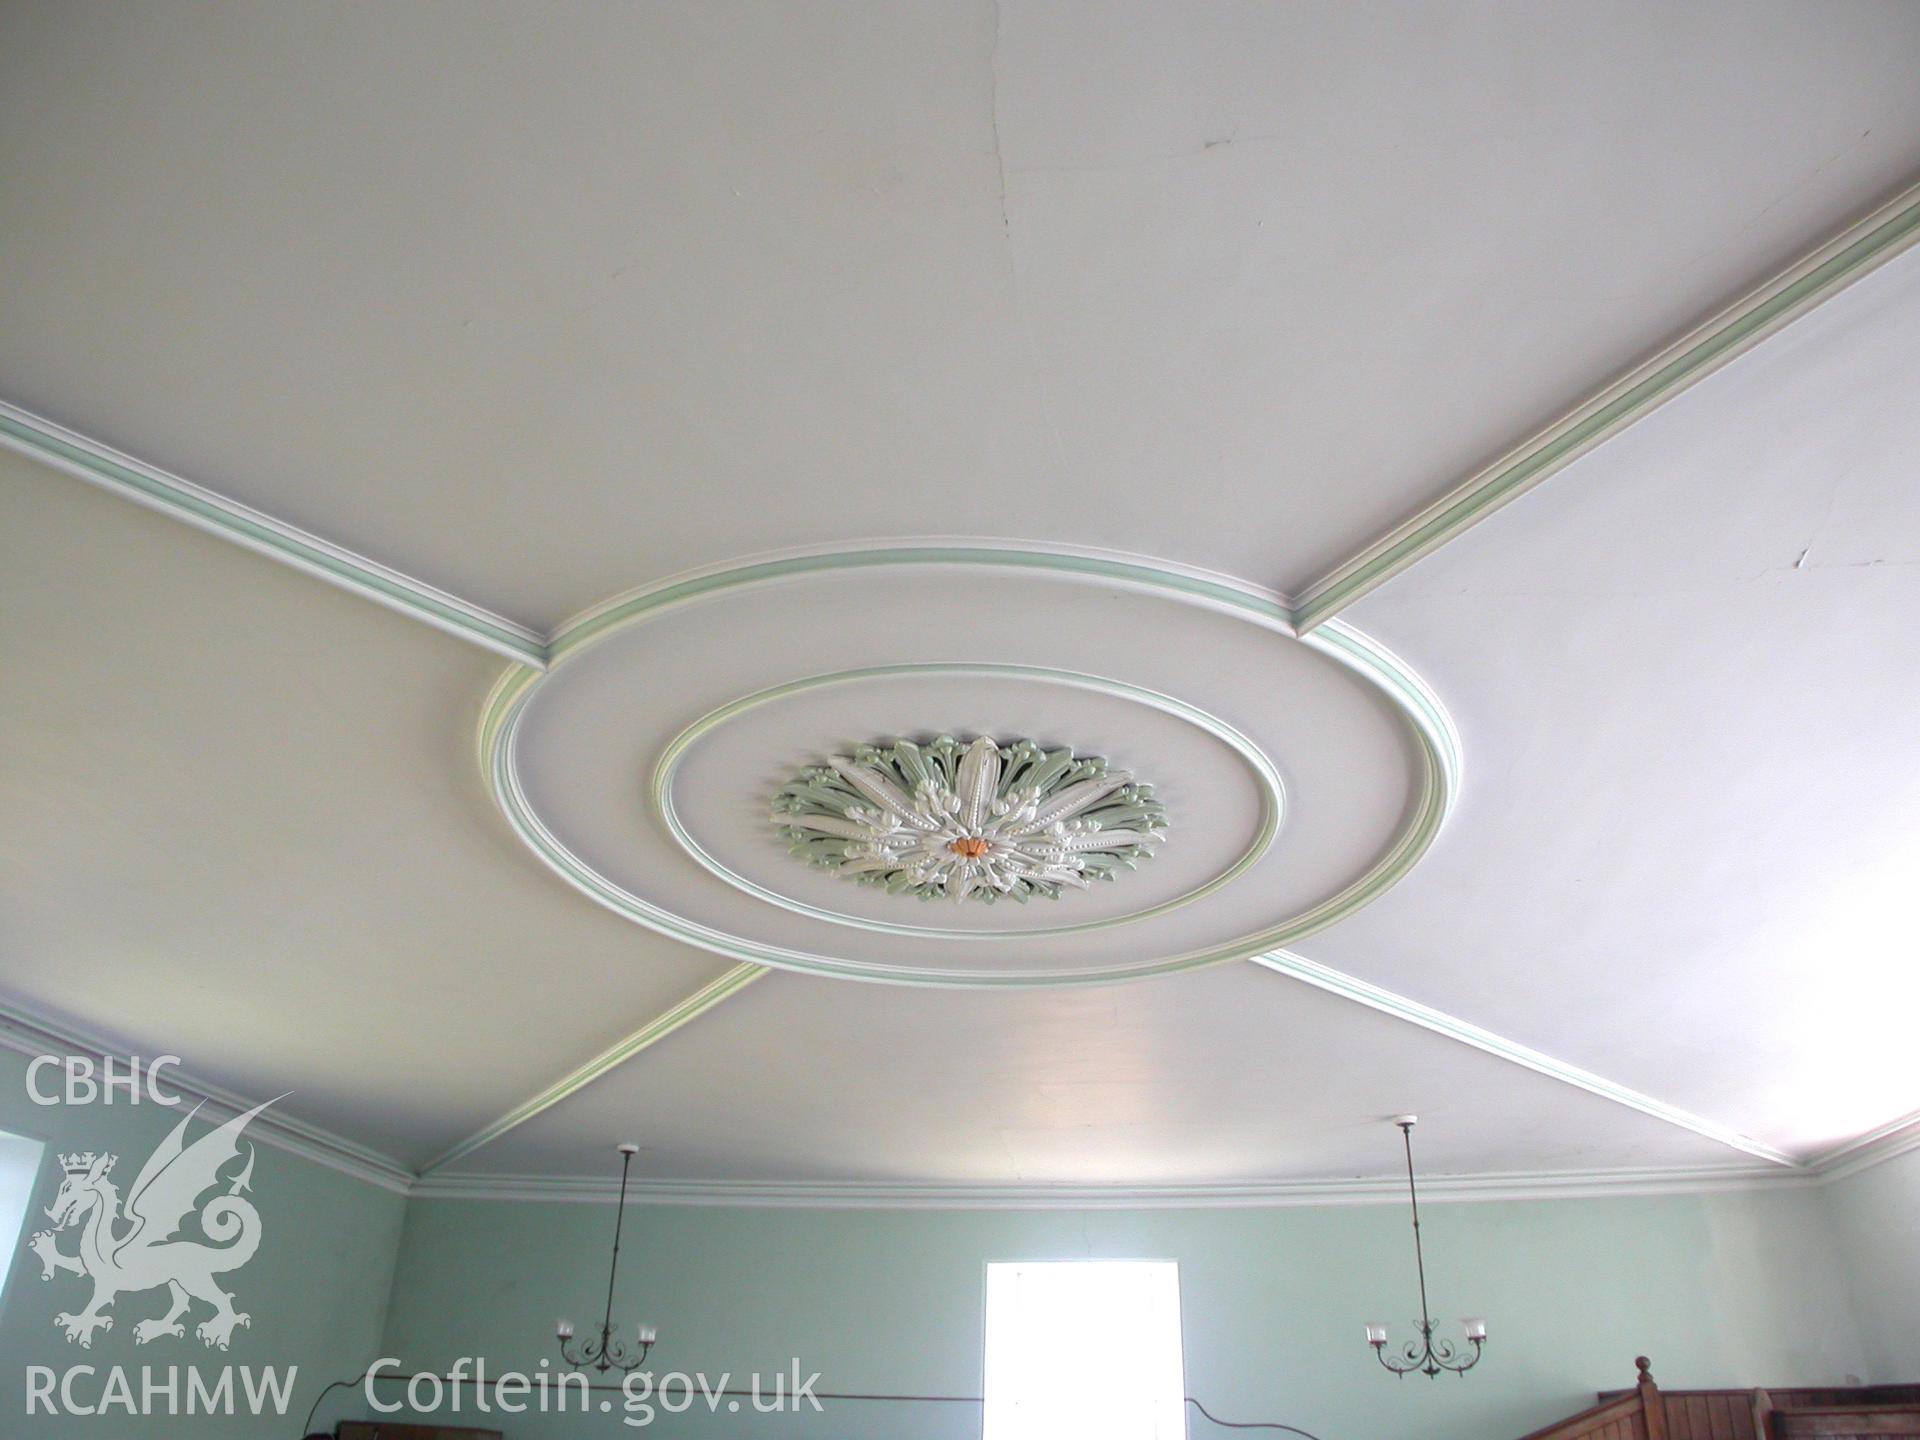 Ceiling rose with radiating ceiling ribs.